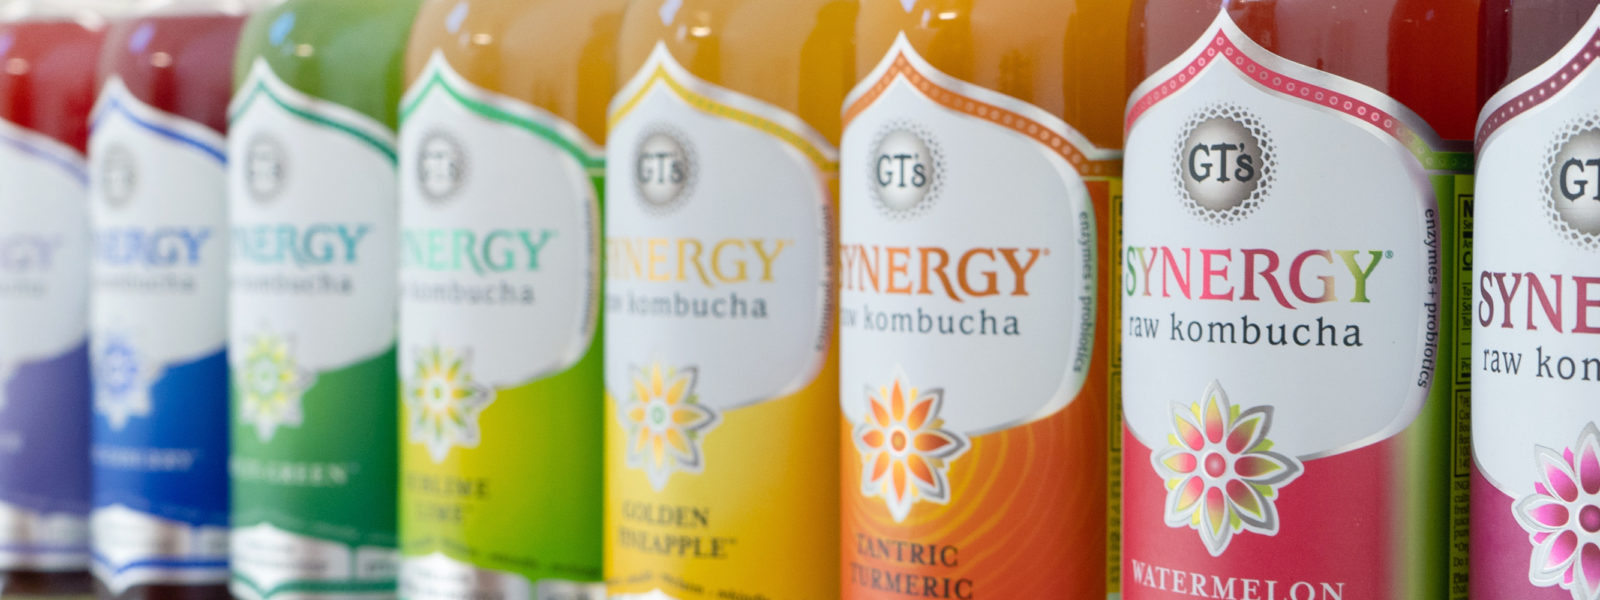 A row of rainbow colored drinks from GT's Kombucha